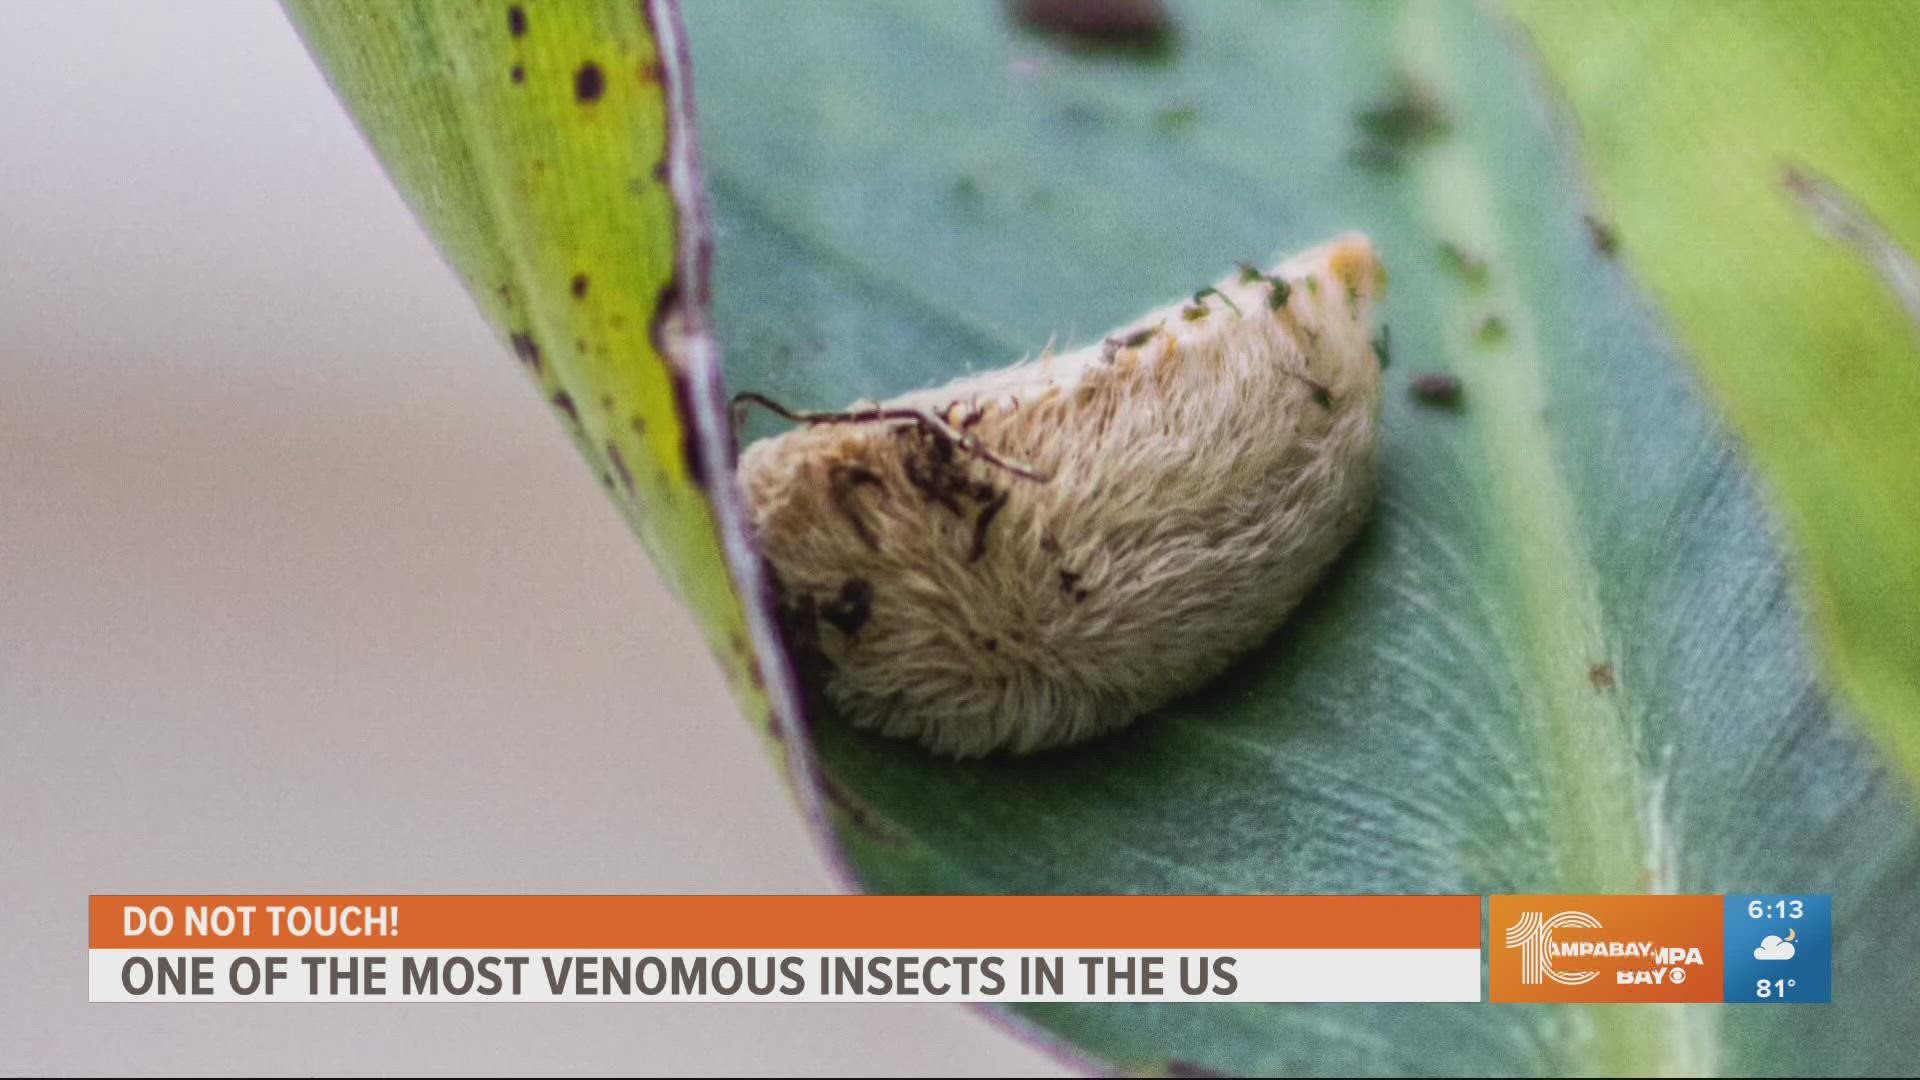 The caterpillars are covered in hair-like bristles and have an orange streak running down their back, according to the Fish and Wildlife Foundation of Florida.